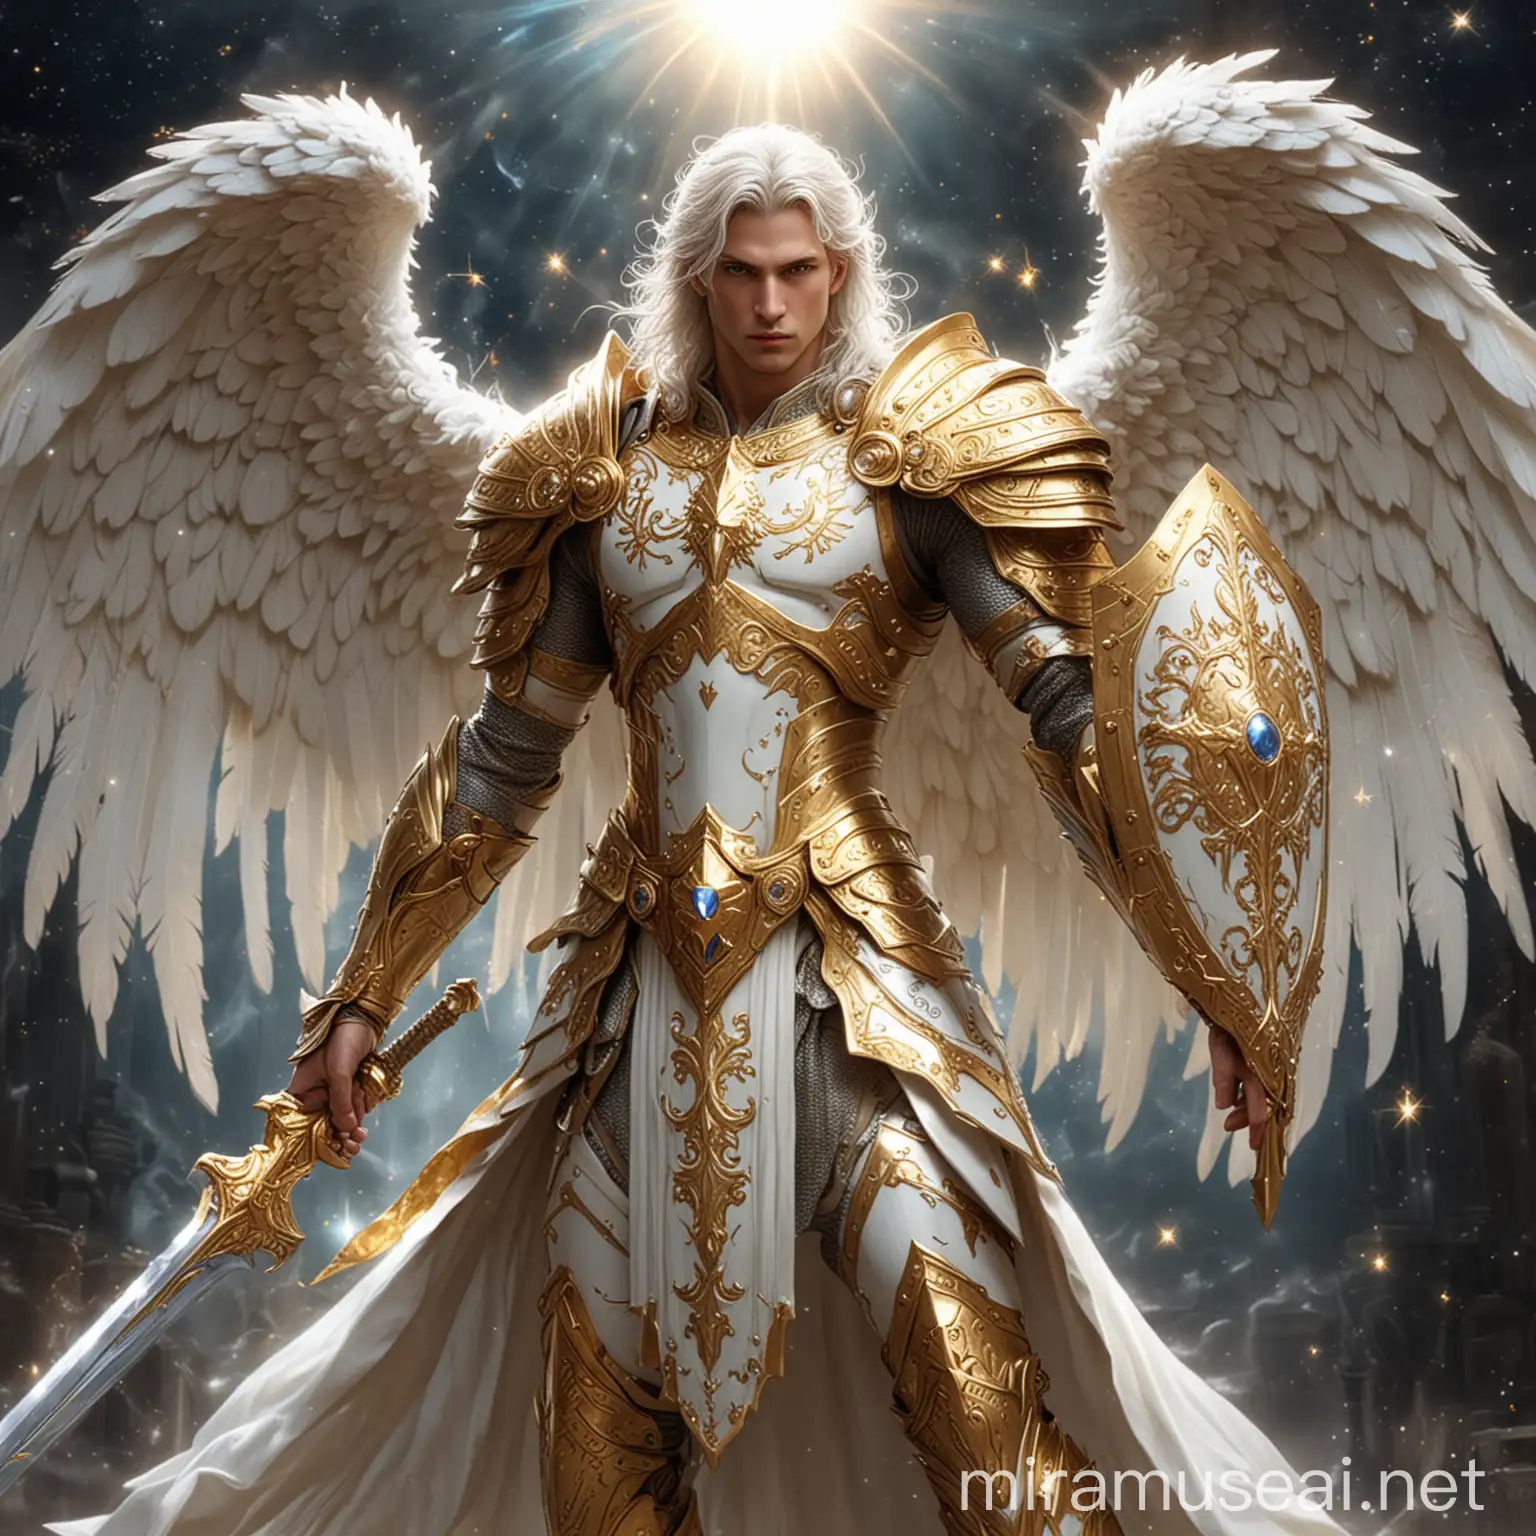 A Male Celestial Guardian is a majestic, radiant being with angelic features. It has glowing white wings, shimmering golden armor, and an aura of divine power. It carries a sword of pure light and a shield emblazoned with celestial symbols.